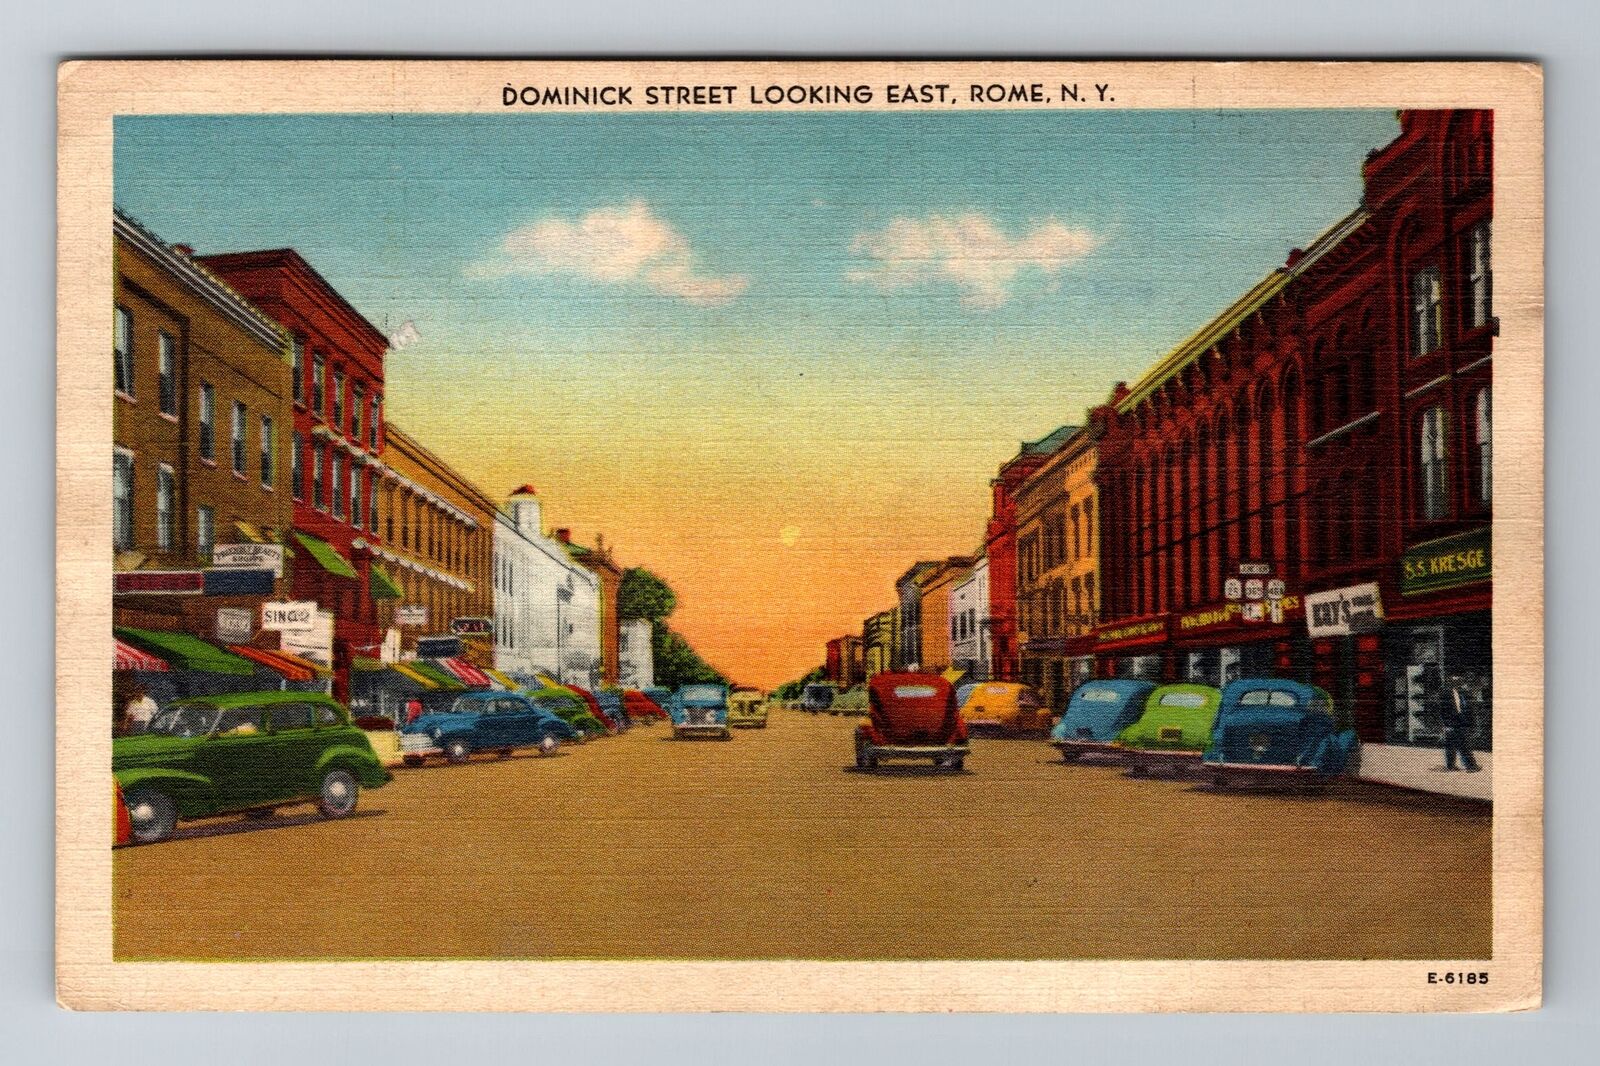 Rome NY-New York, Dominick Street Looking East, Antique, Vintage c1948 Postcard